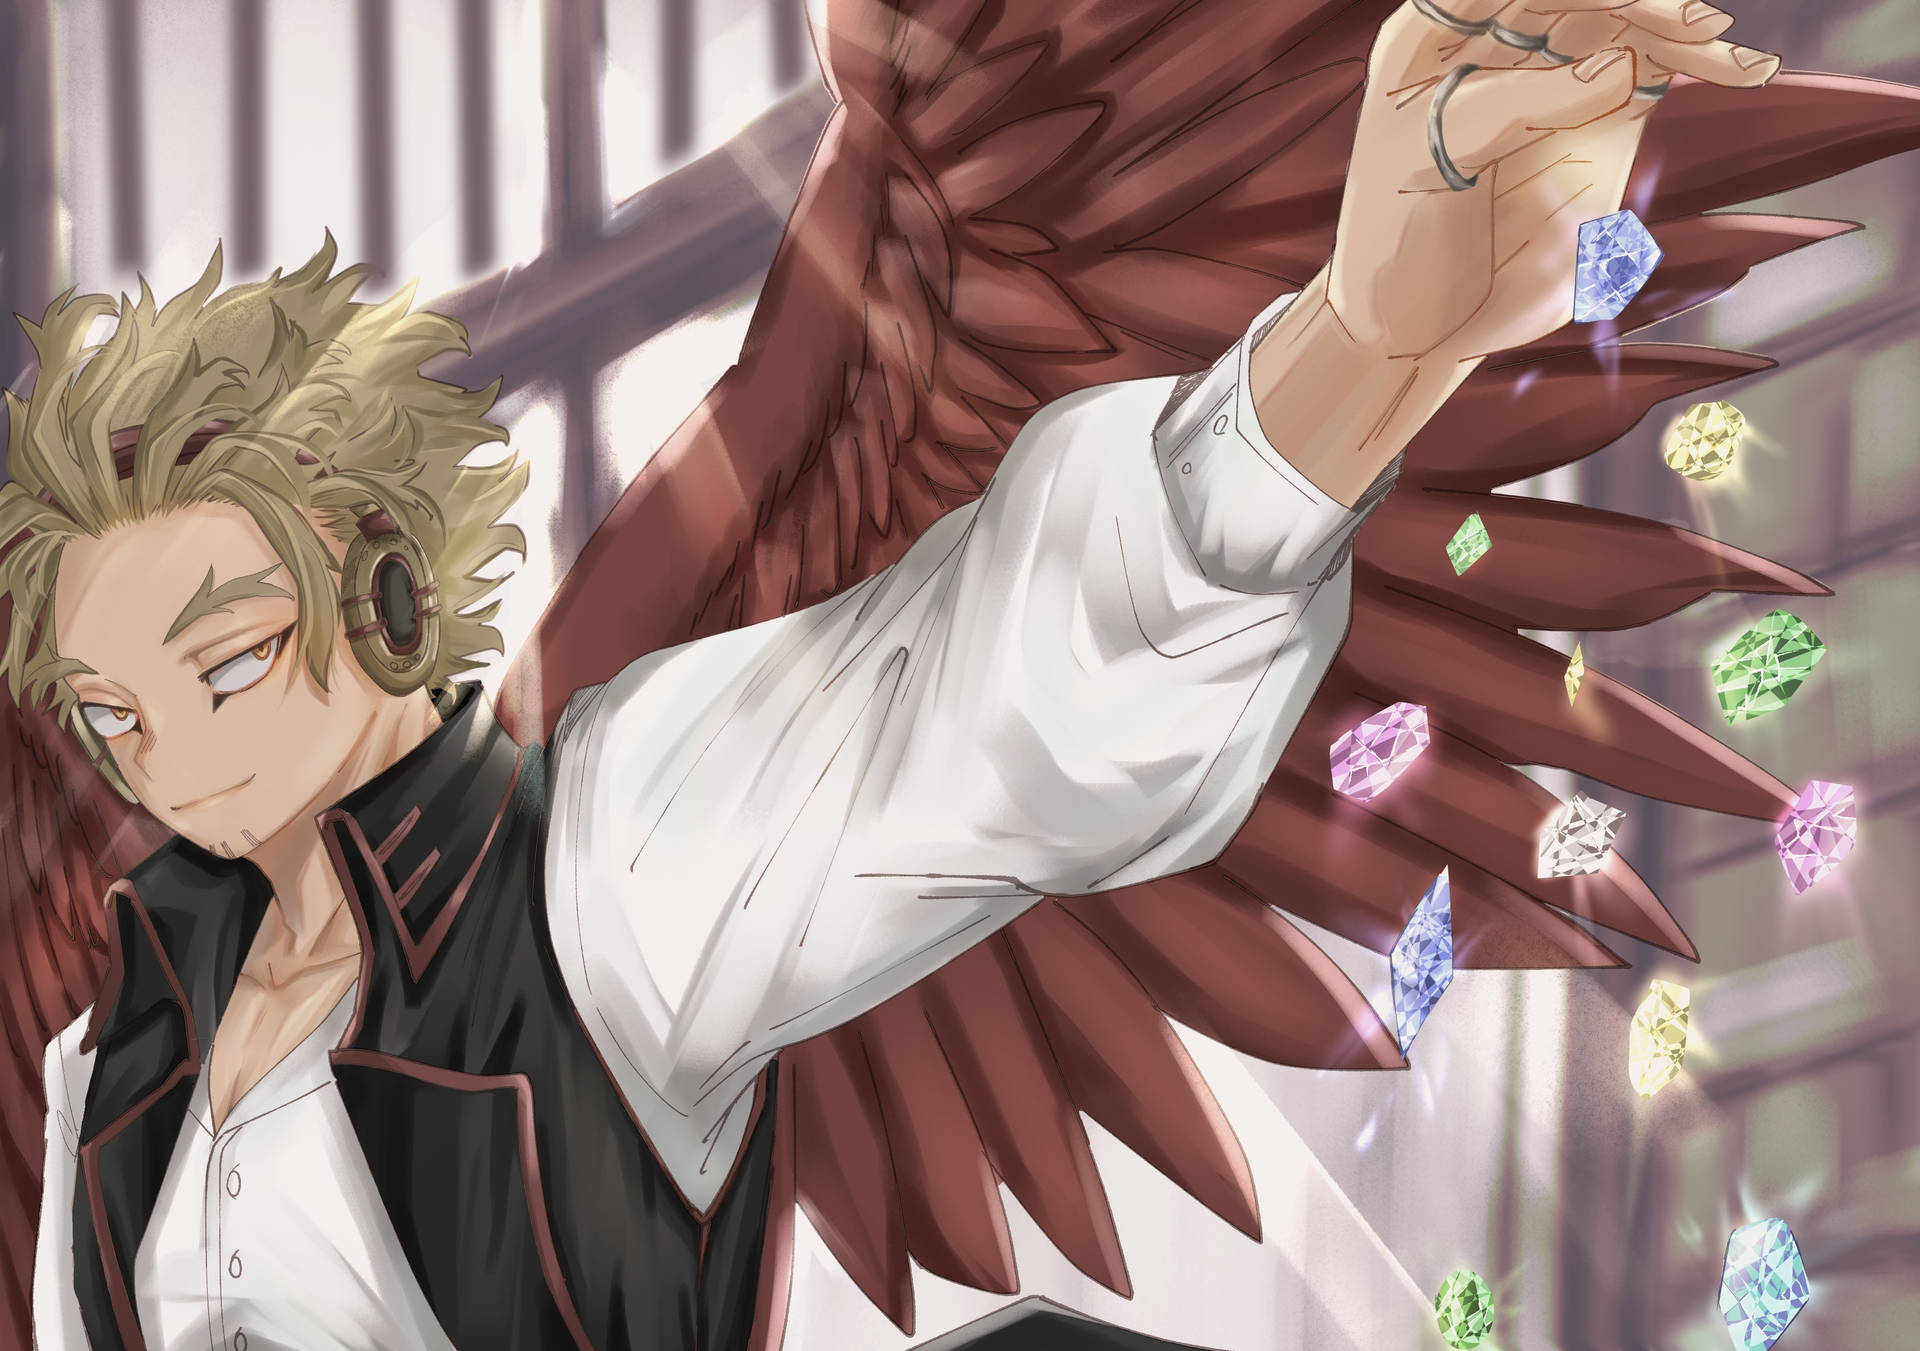 A Man With Wings Holding A Bunch Of Jewels Wallpaper